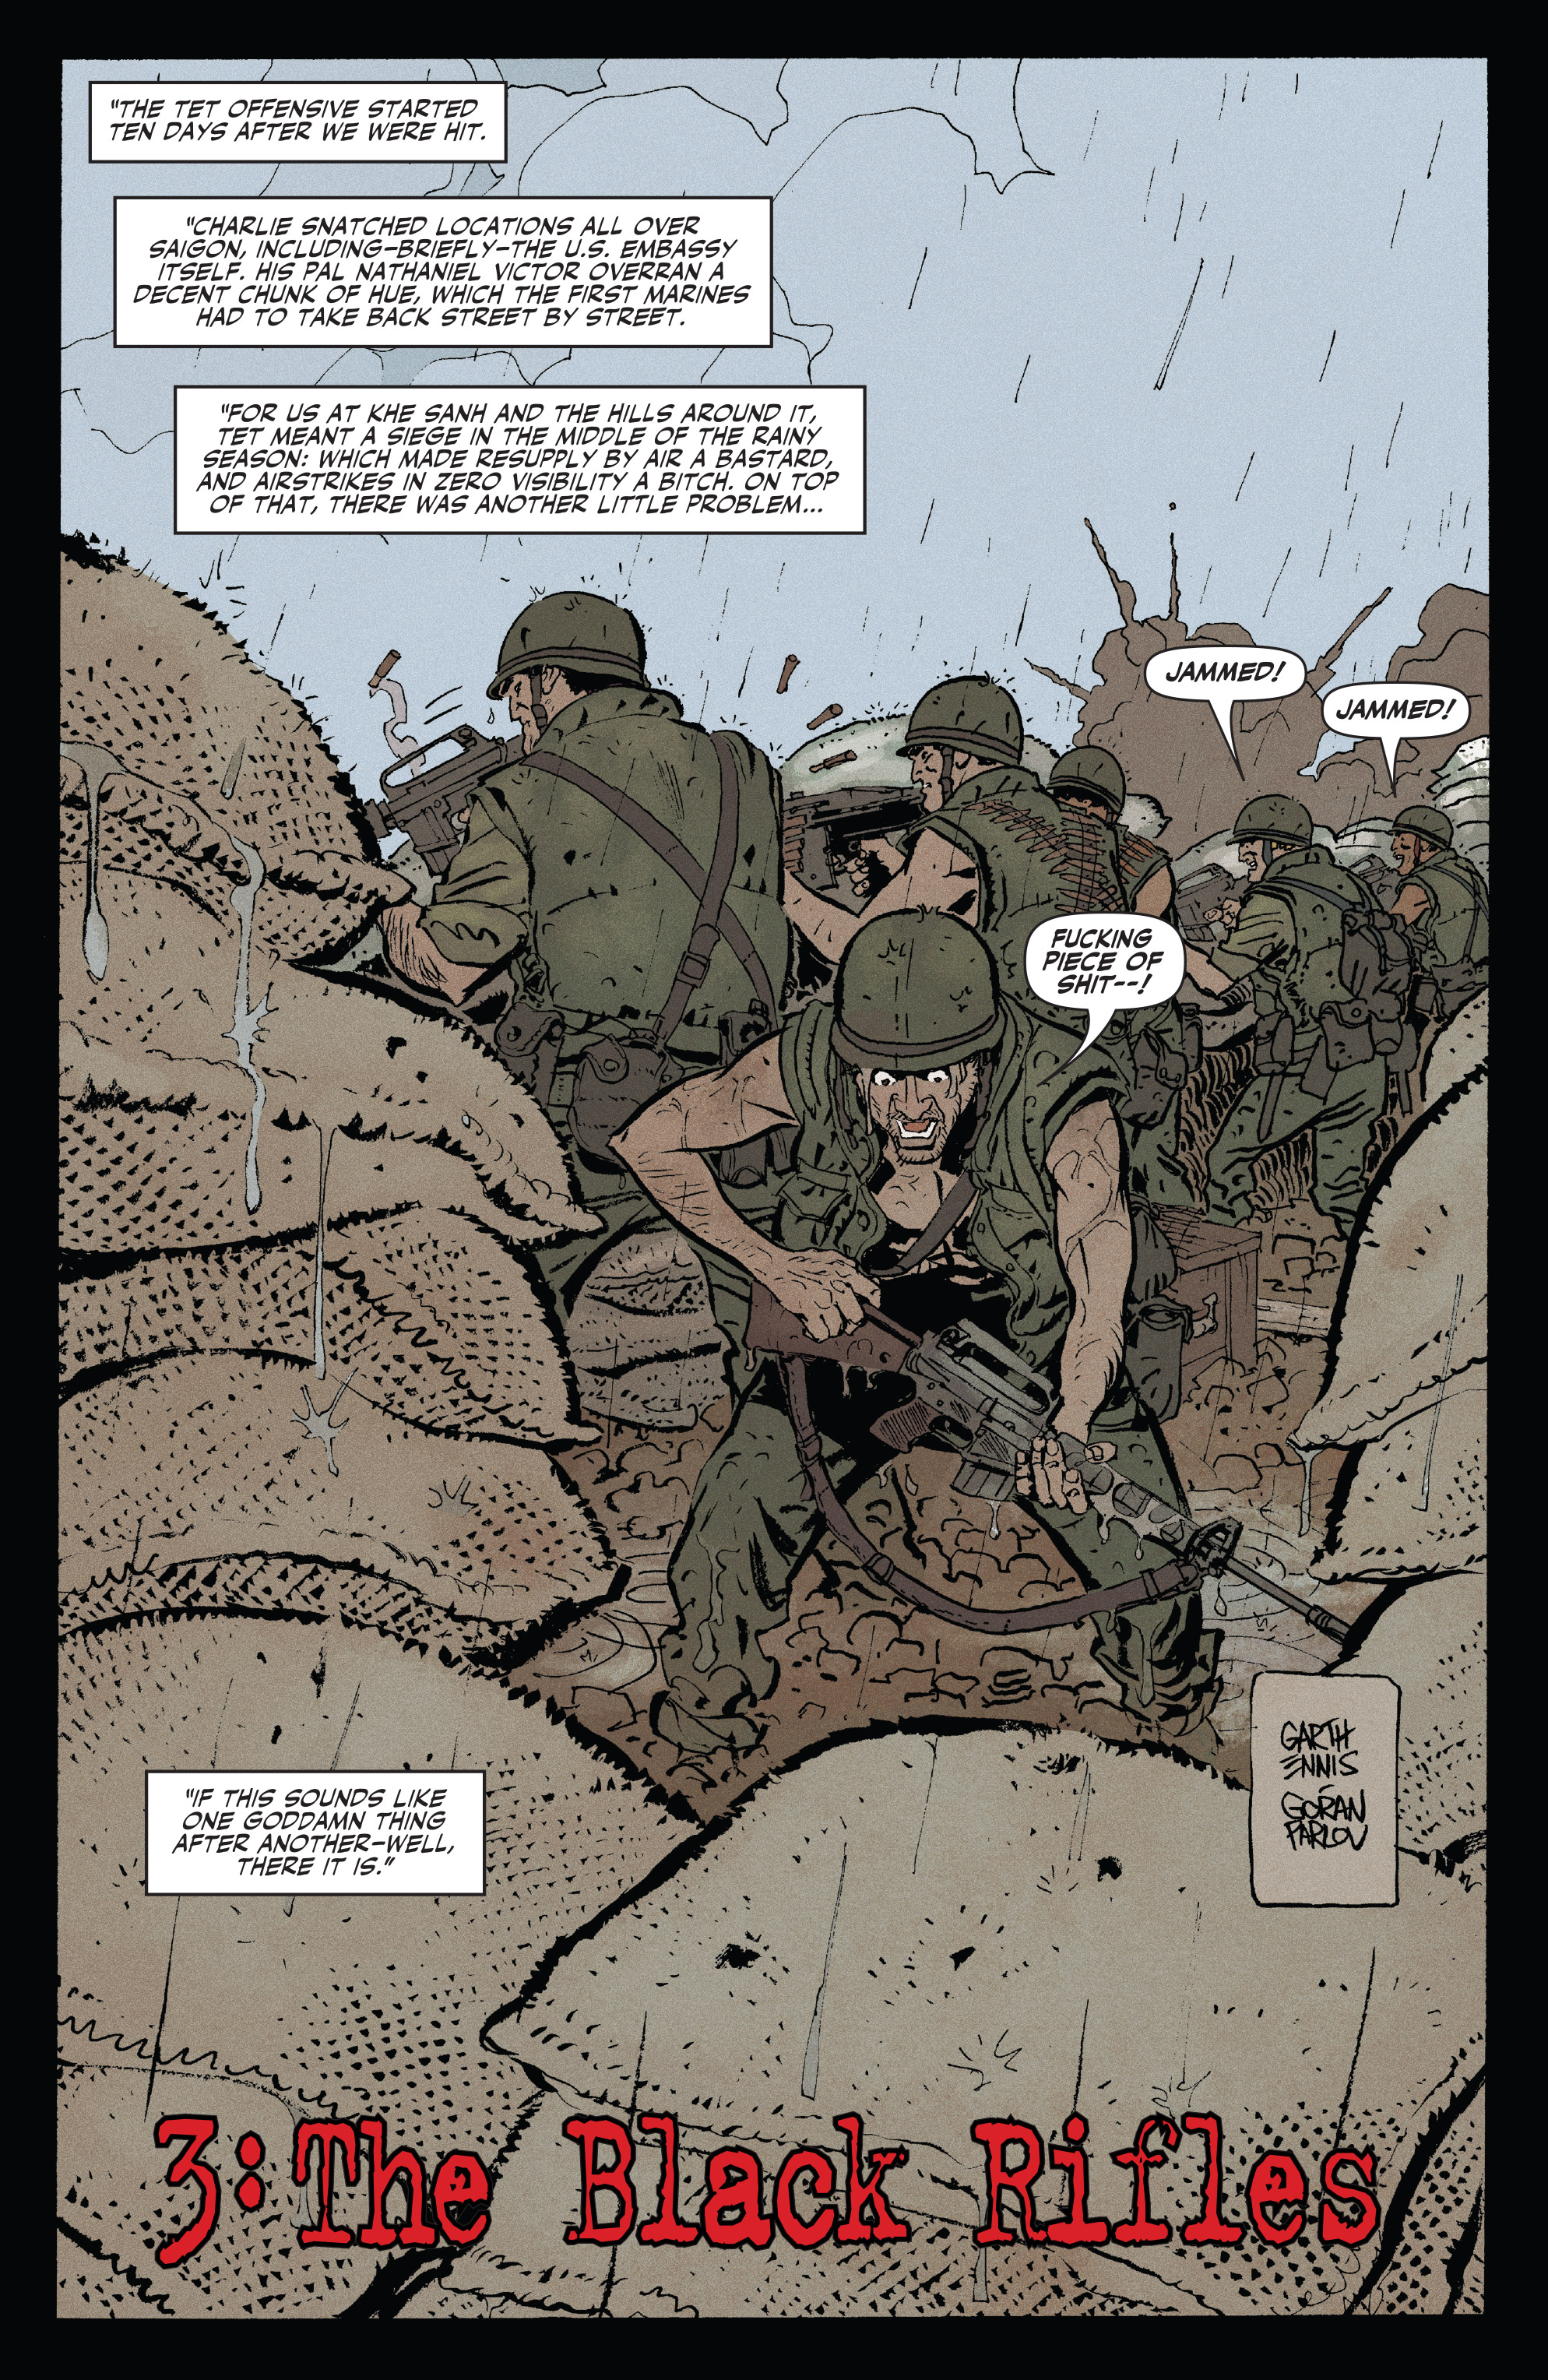 Punisher: The Platoon (2017): Chapter 3 - Page 3